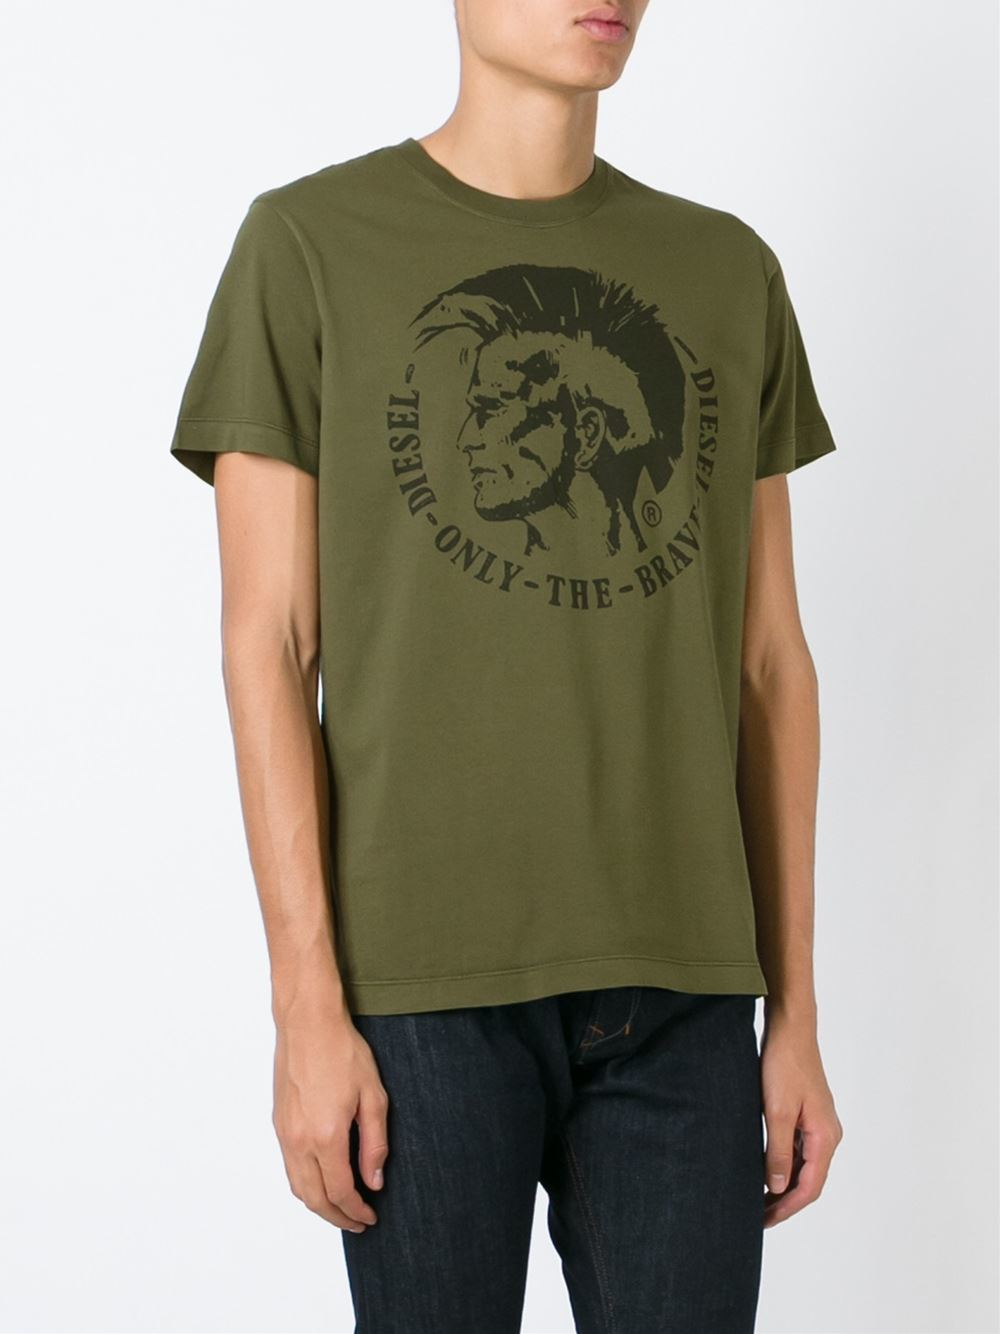 Lyst - Diesel Only The Brave T-shirt in Green for Men